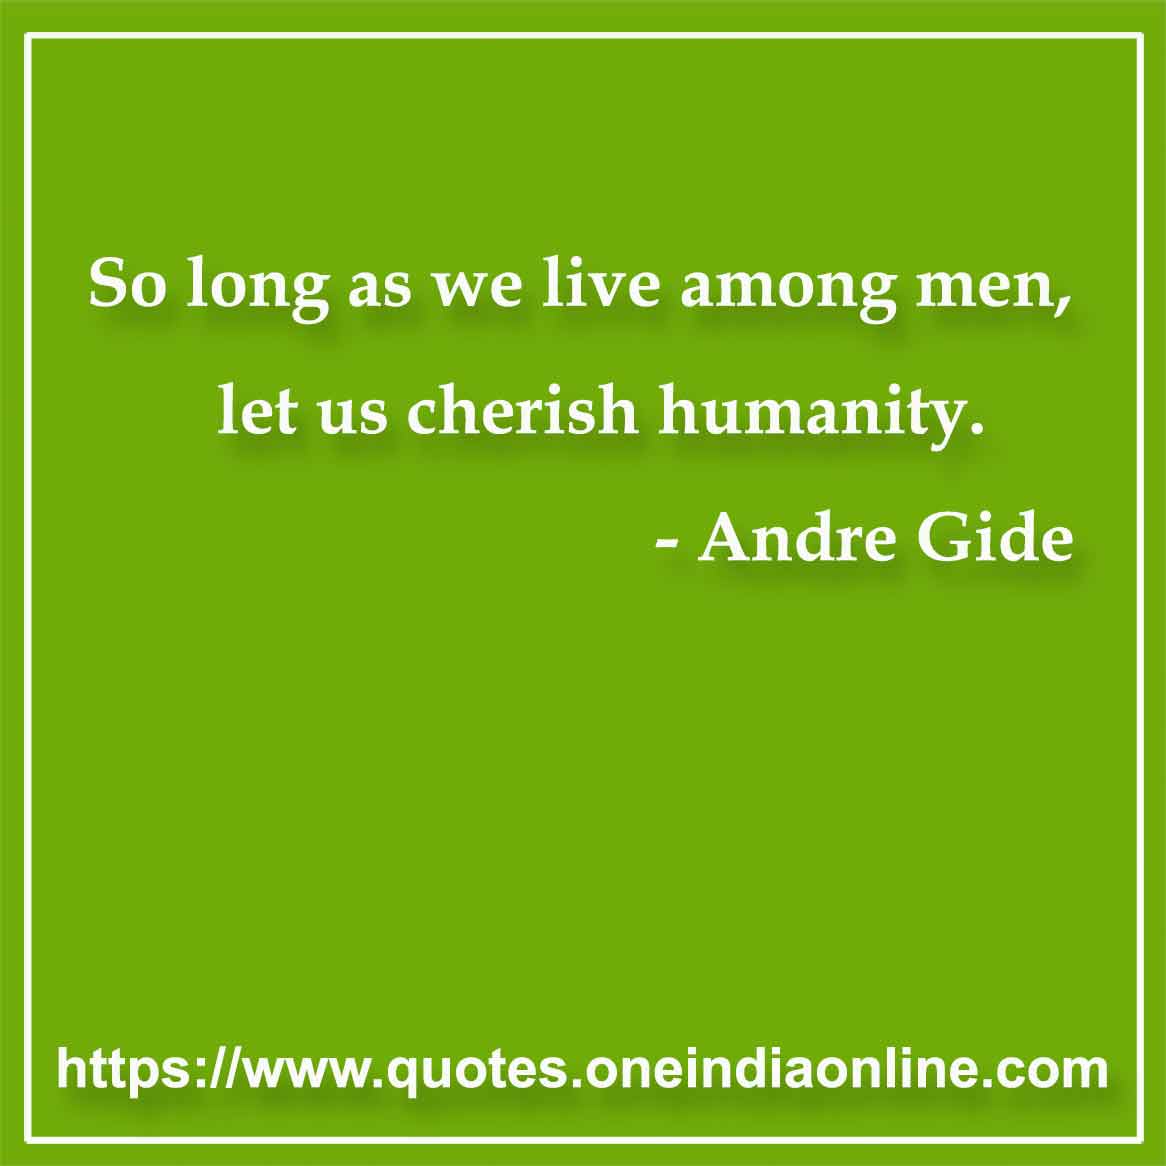 So long as we live among men, let us cherish humanity.

- Mankind Quotes by Andre Gide 